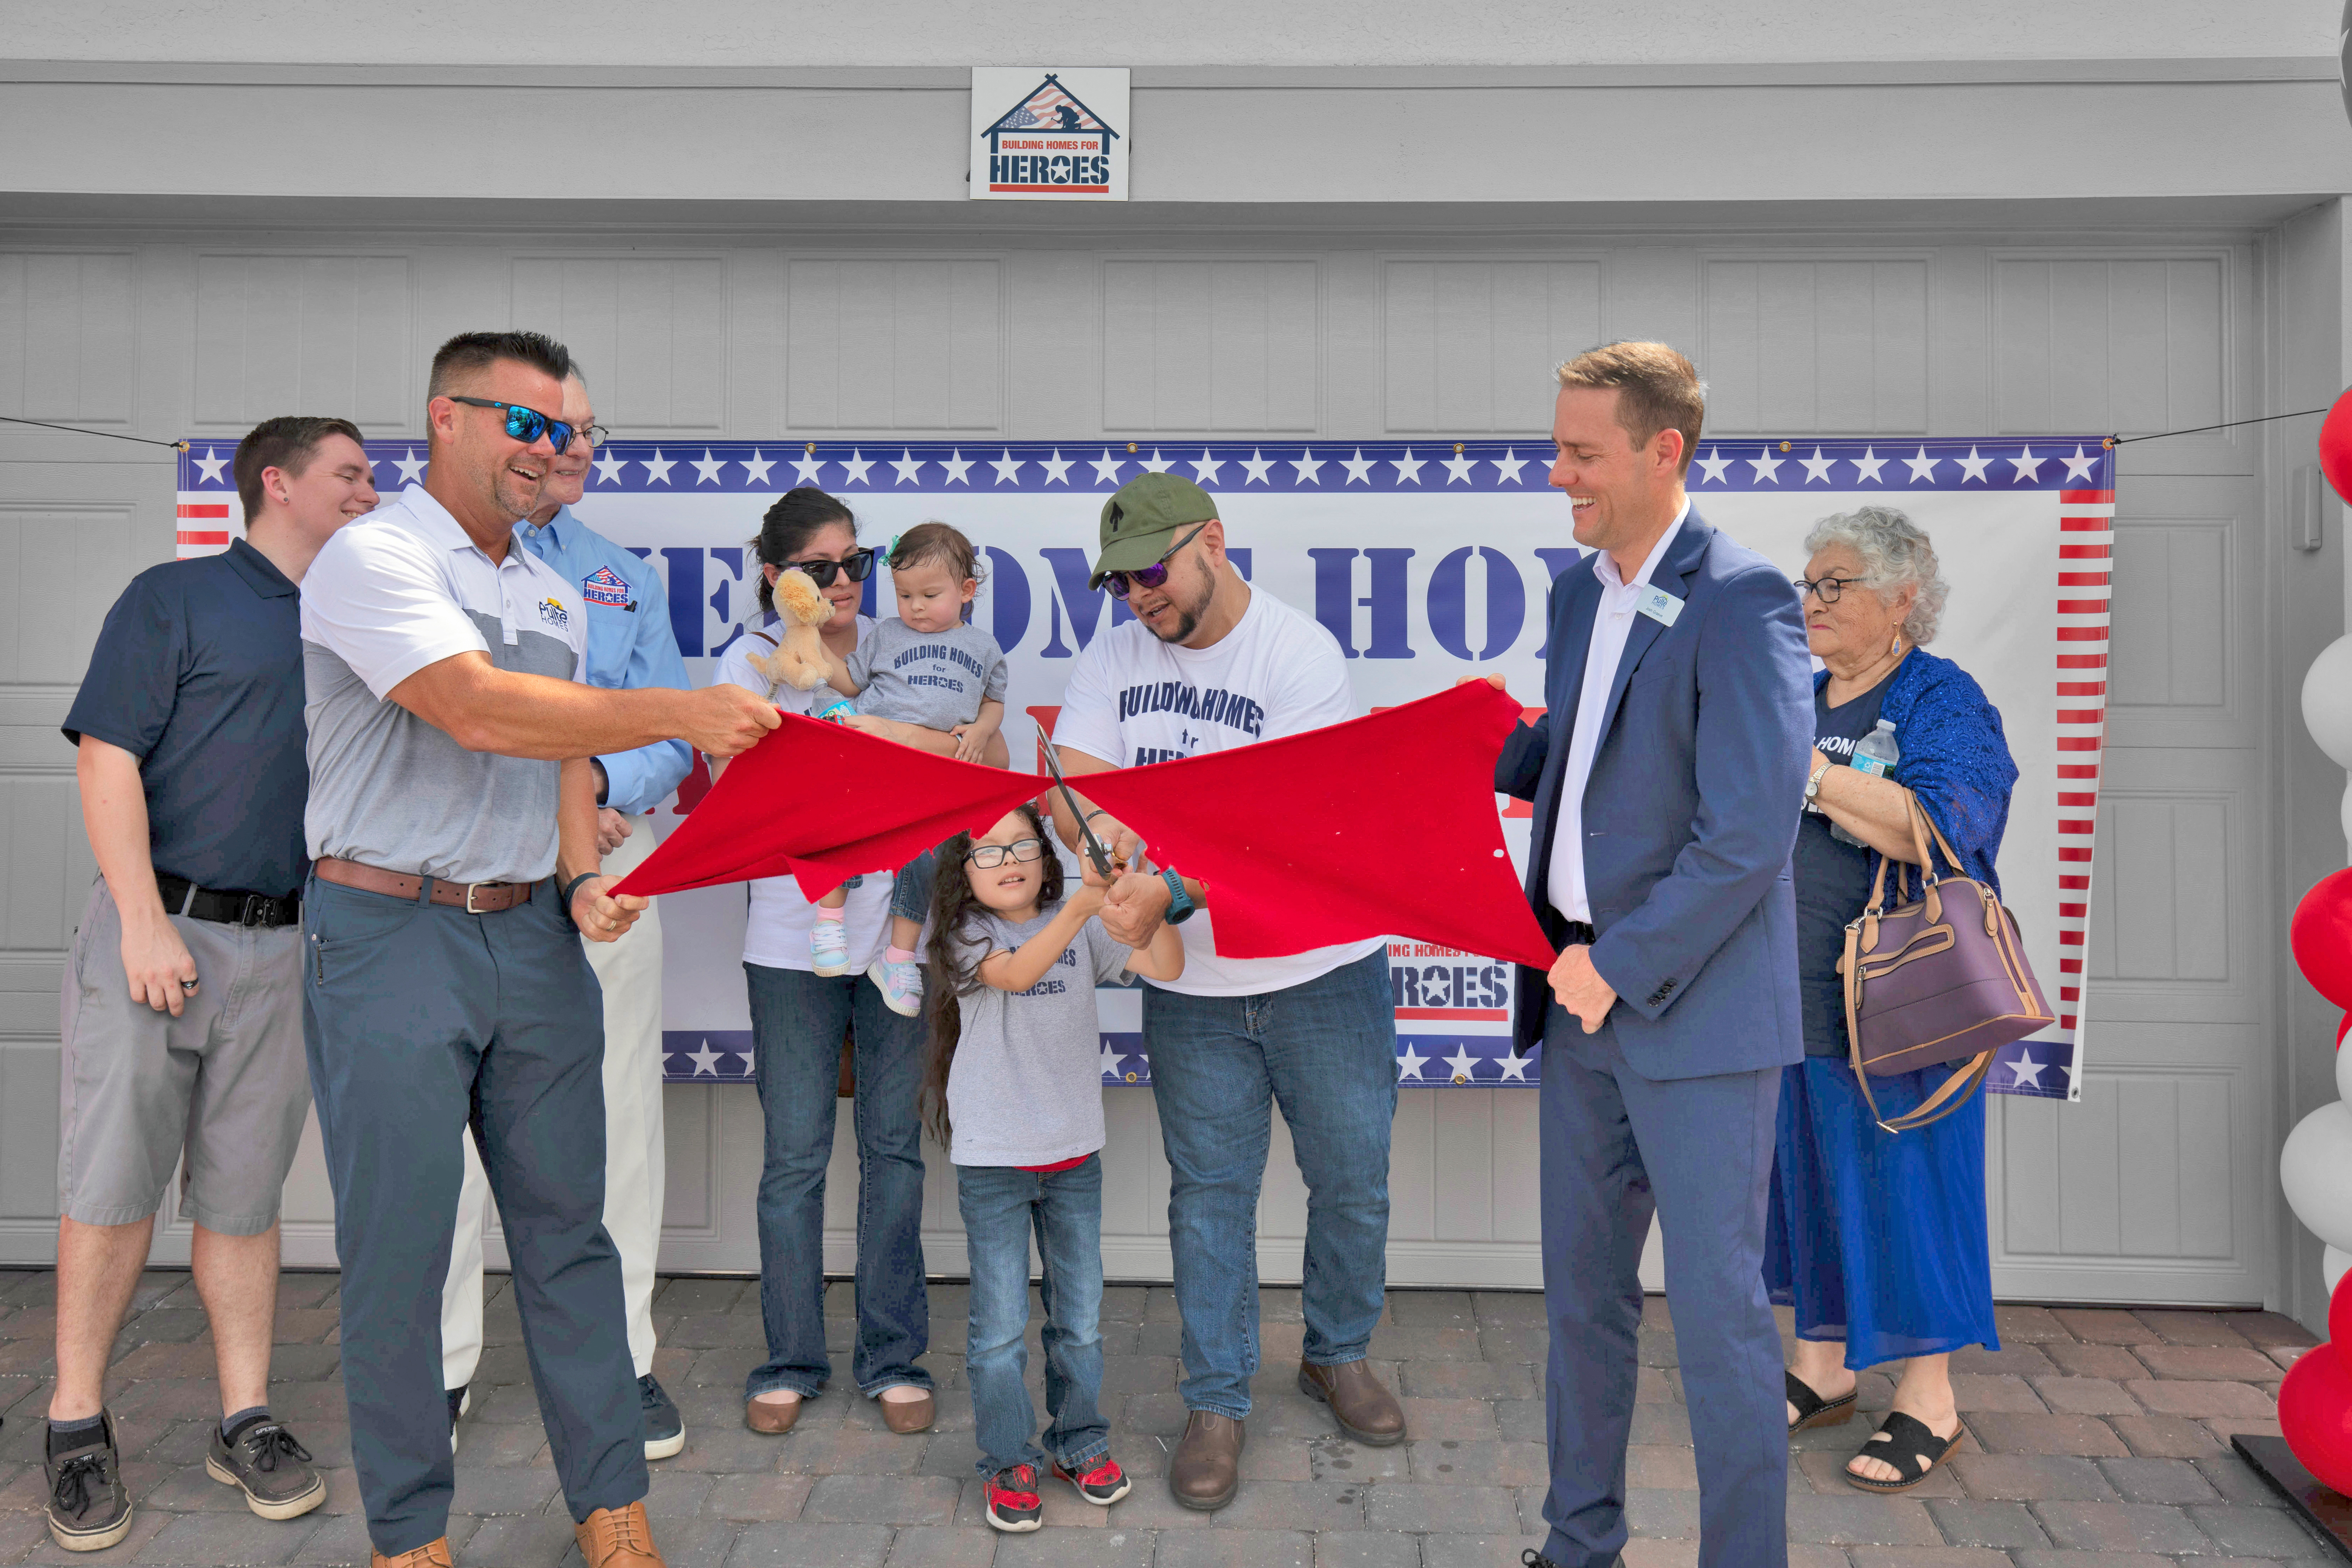 U.S. Army Sergeant First Class Lucio Gaytan's Journey to Homeownership in Southwest Florida